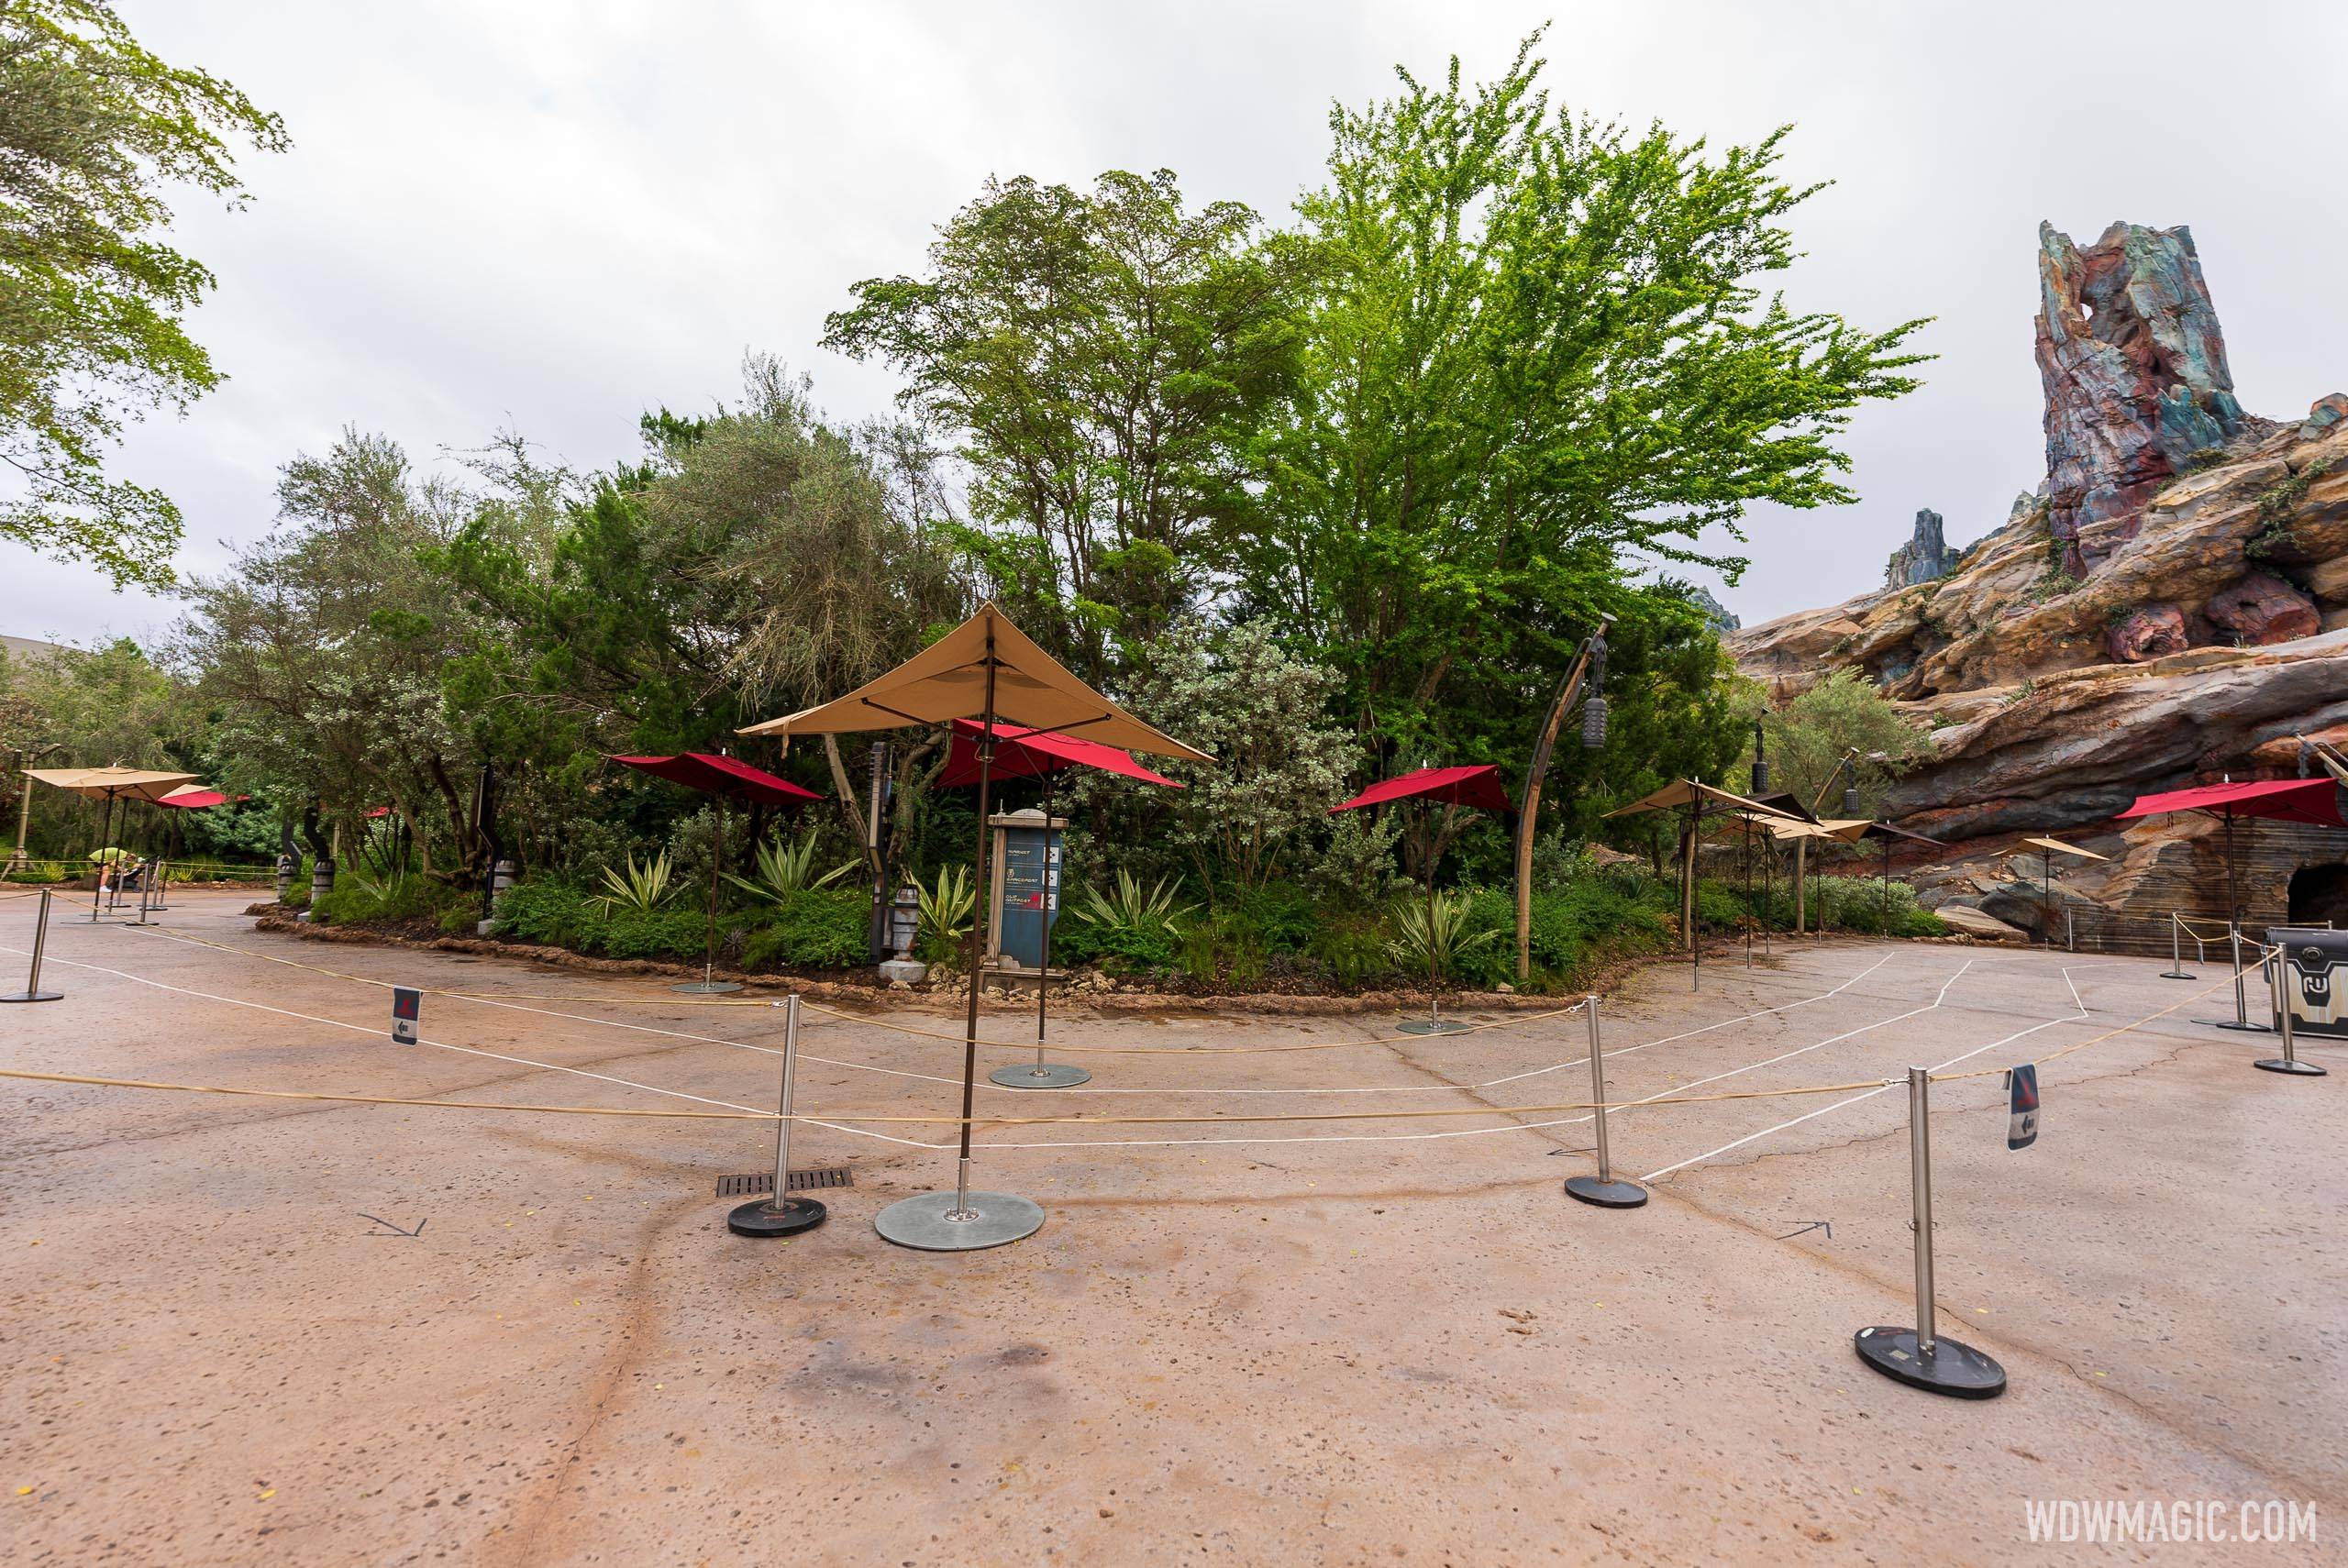 Extended area for the Star Wars Rise of the Resistance standby queue